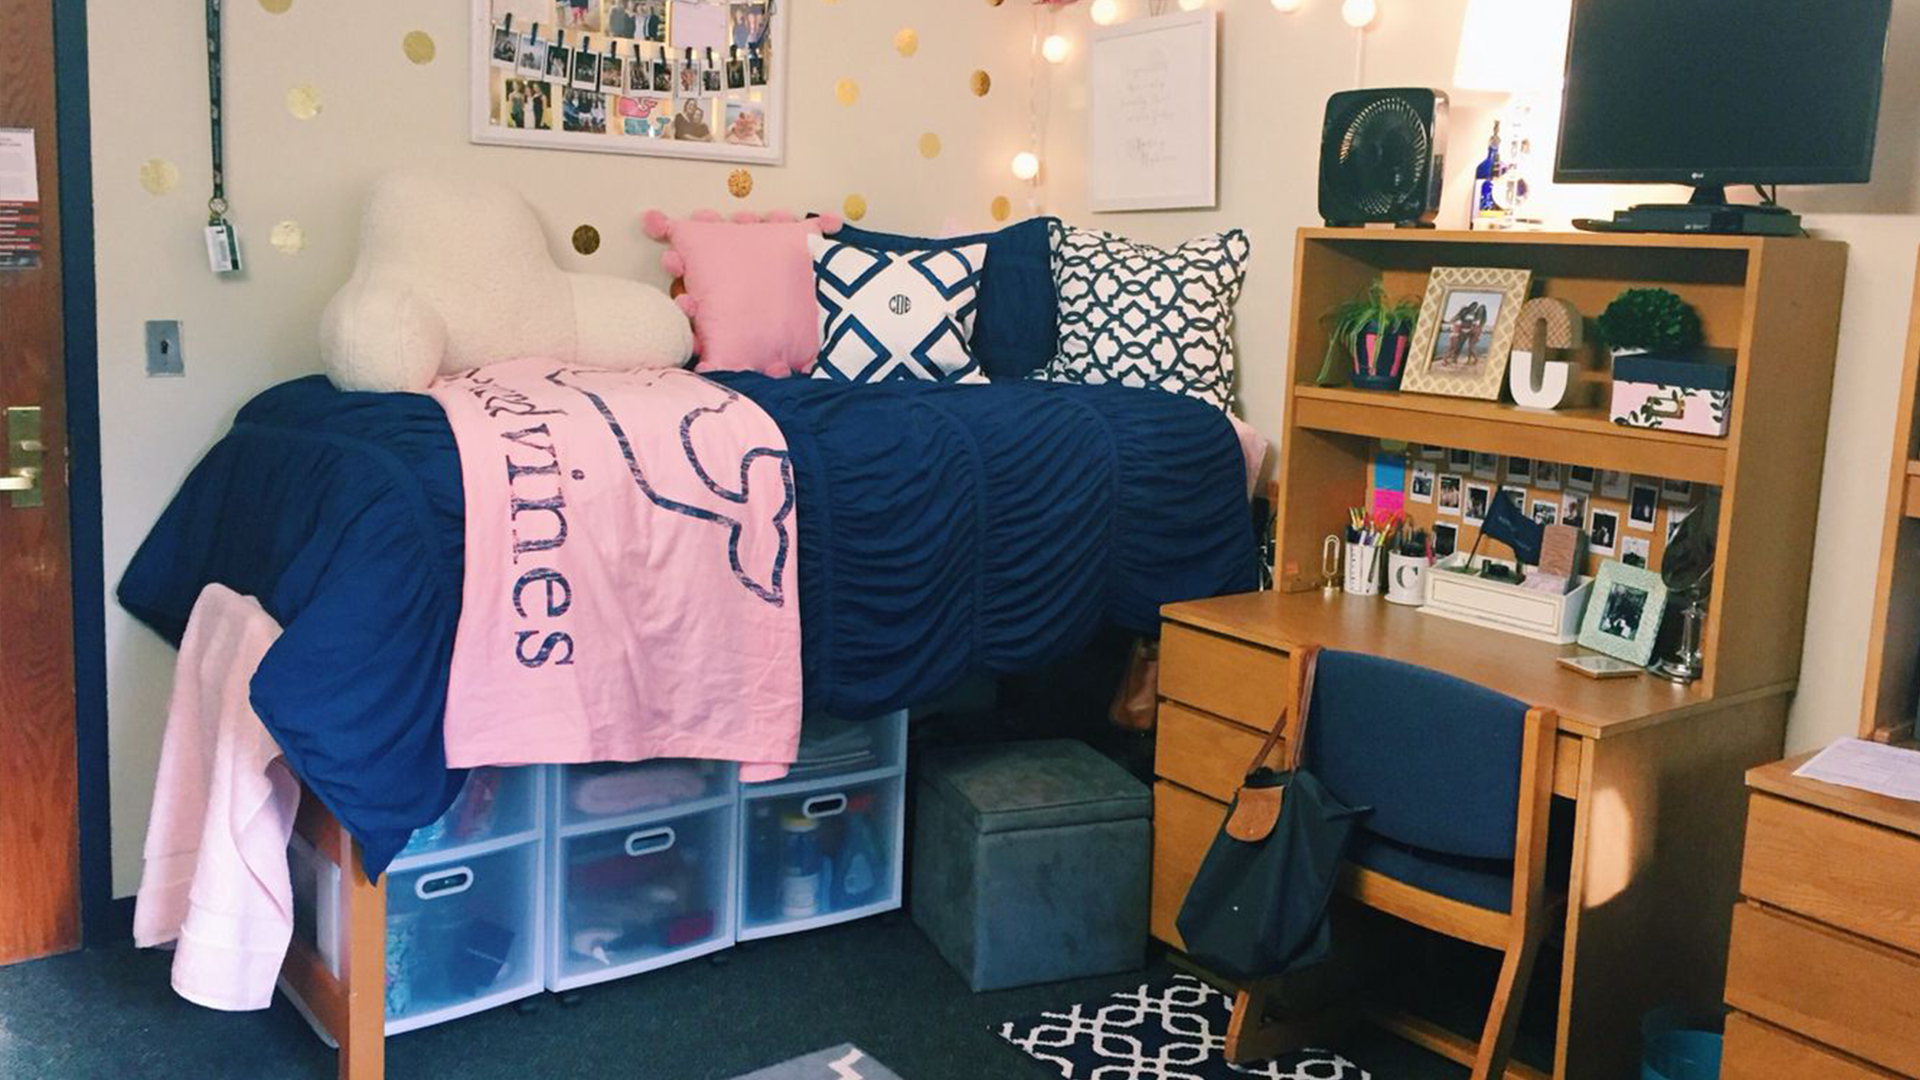 Popular dorm room color scheme of combination of blue and pink